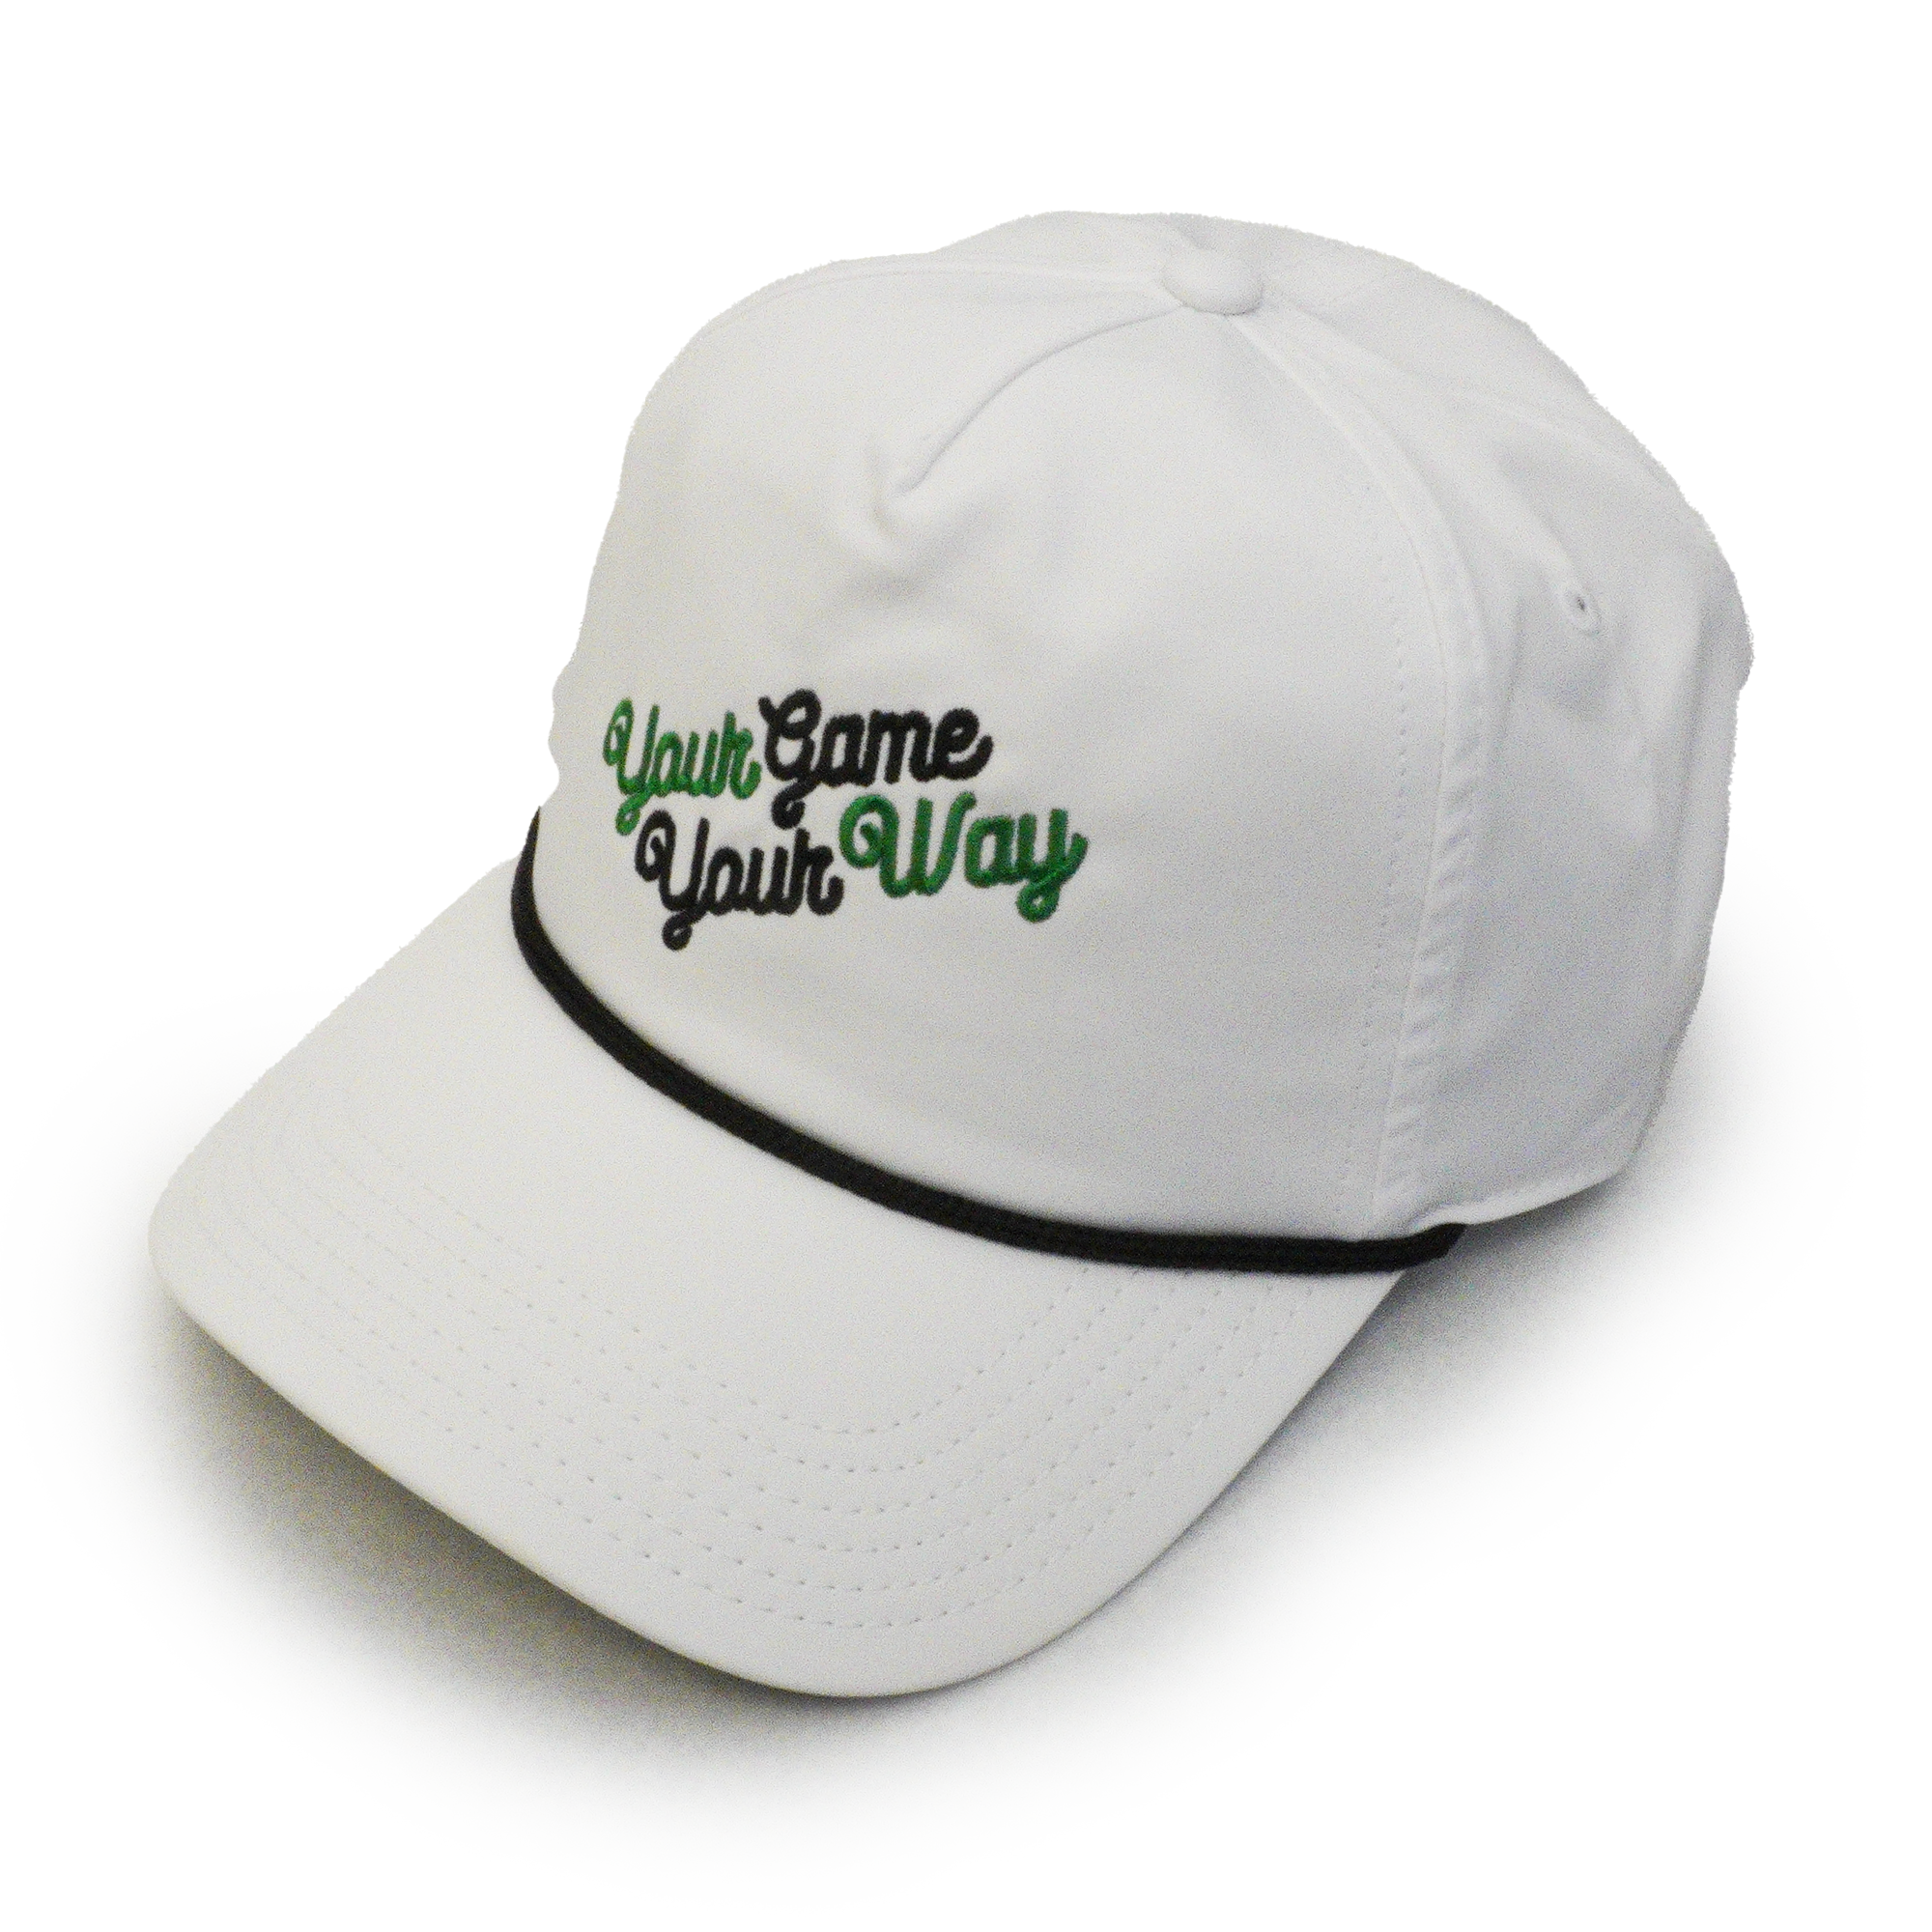 YGYW Performance Rope 5-Panel Cap